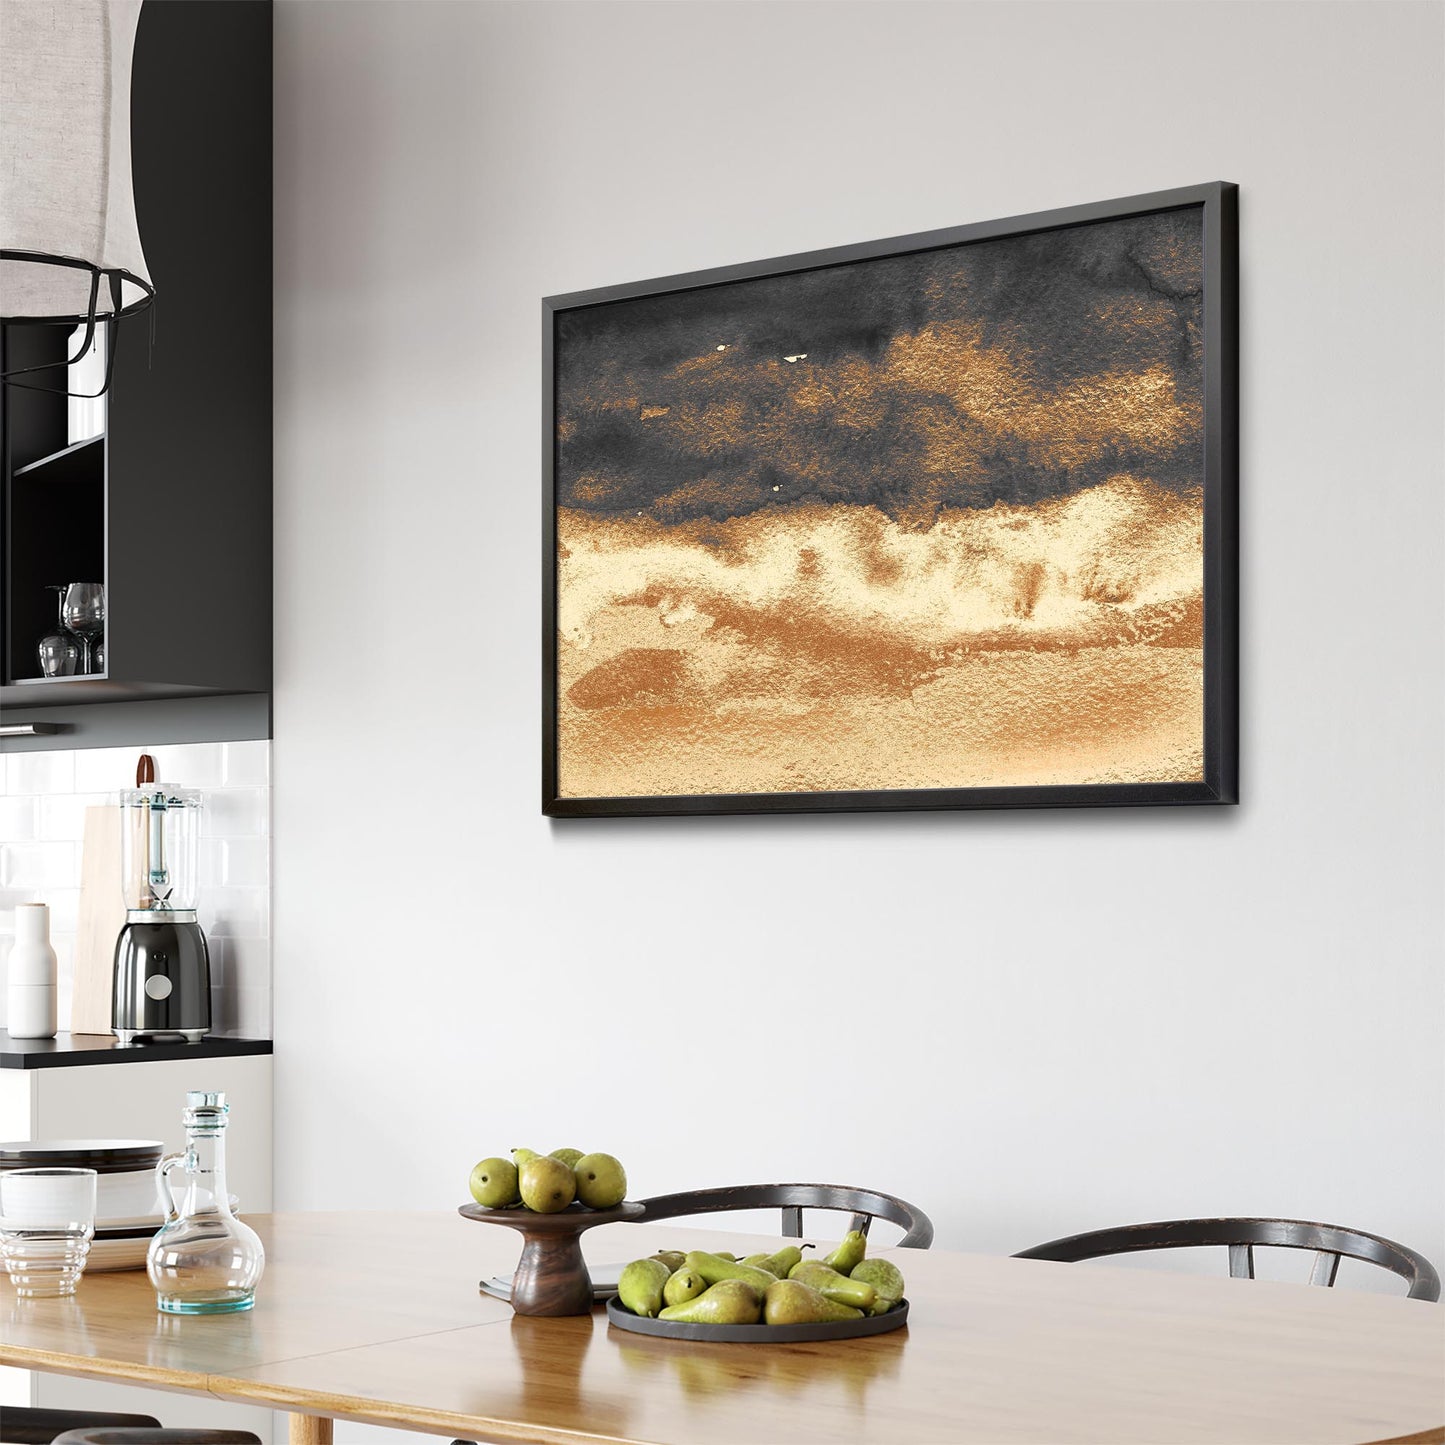 Black and Gold Abstract Painting Minimal Wall Art #1 - The Affordable Art Company